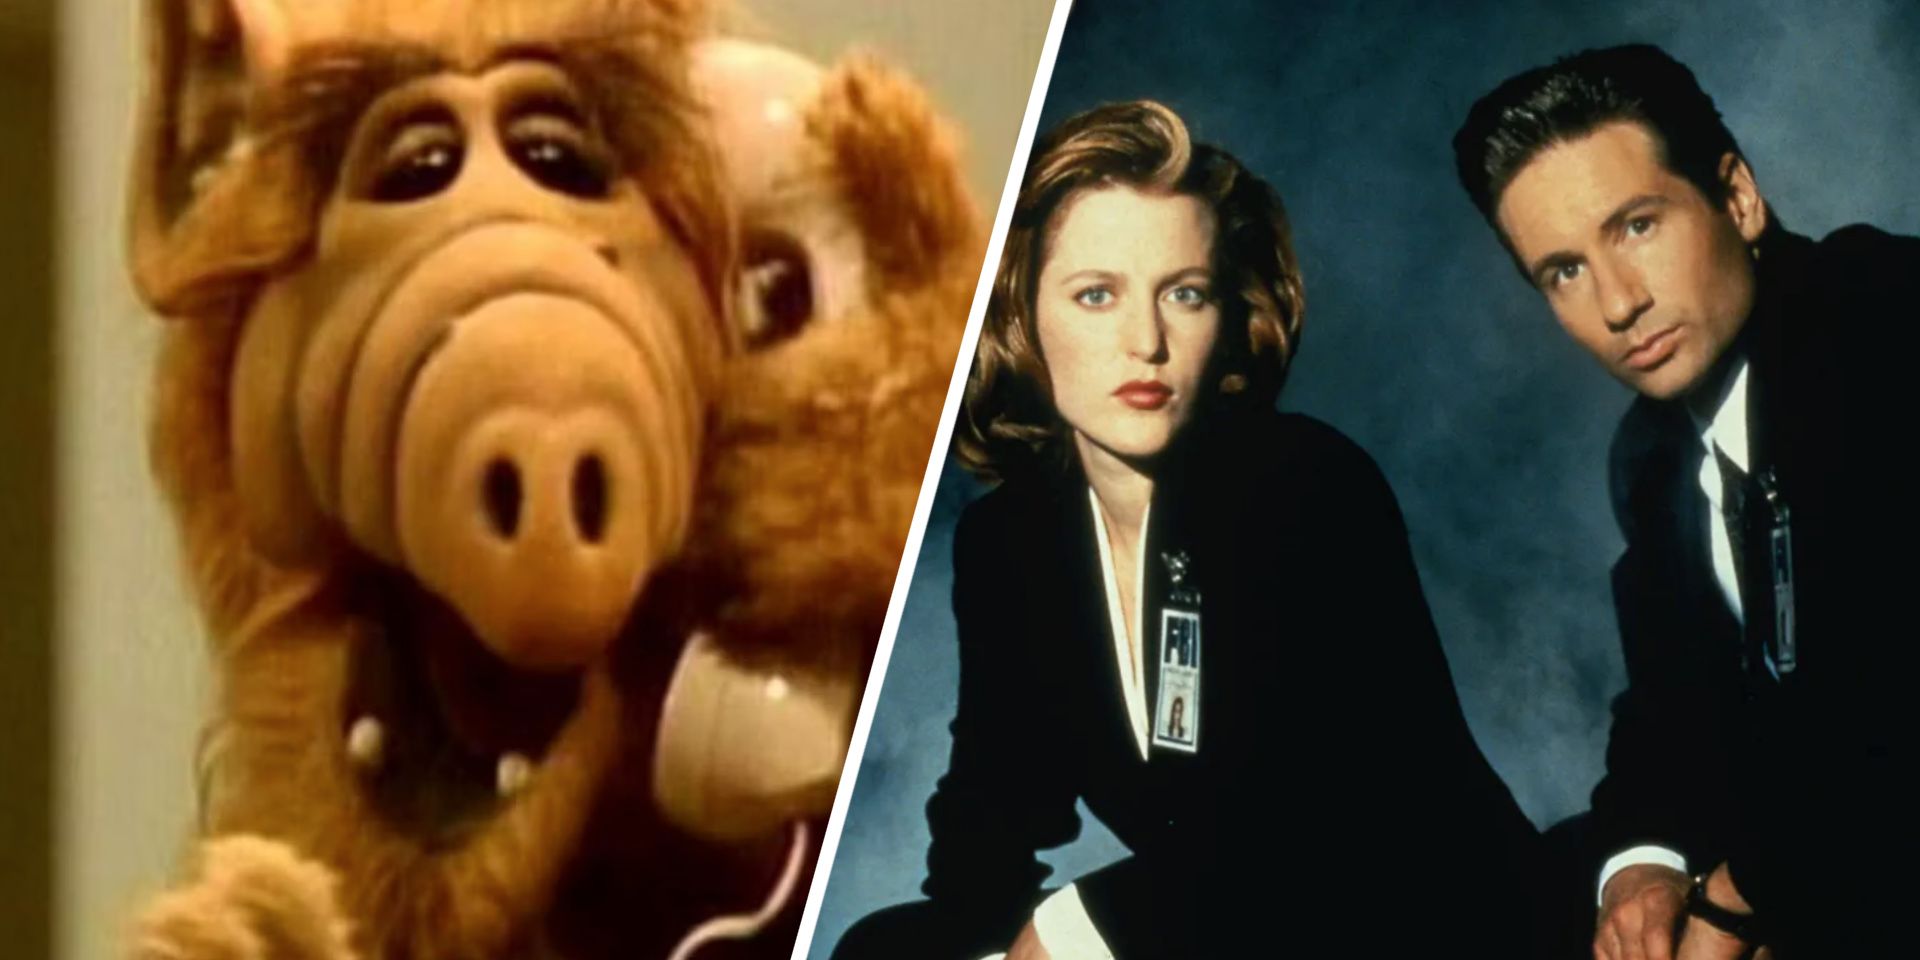 ALF talks on the phone. Scully and Mulder pose for the camera in The X-Files